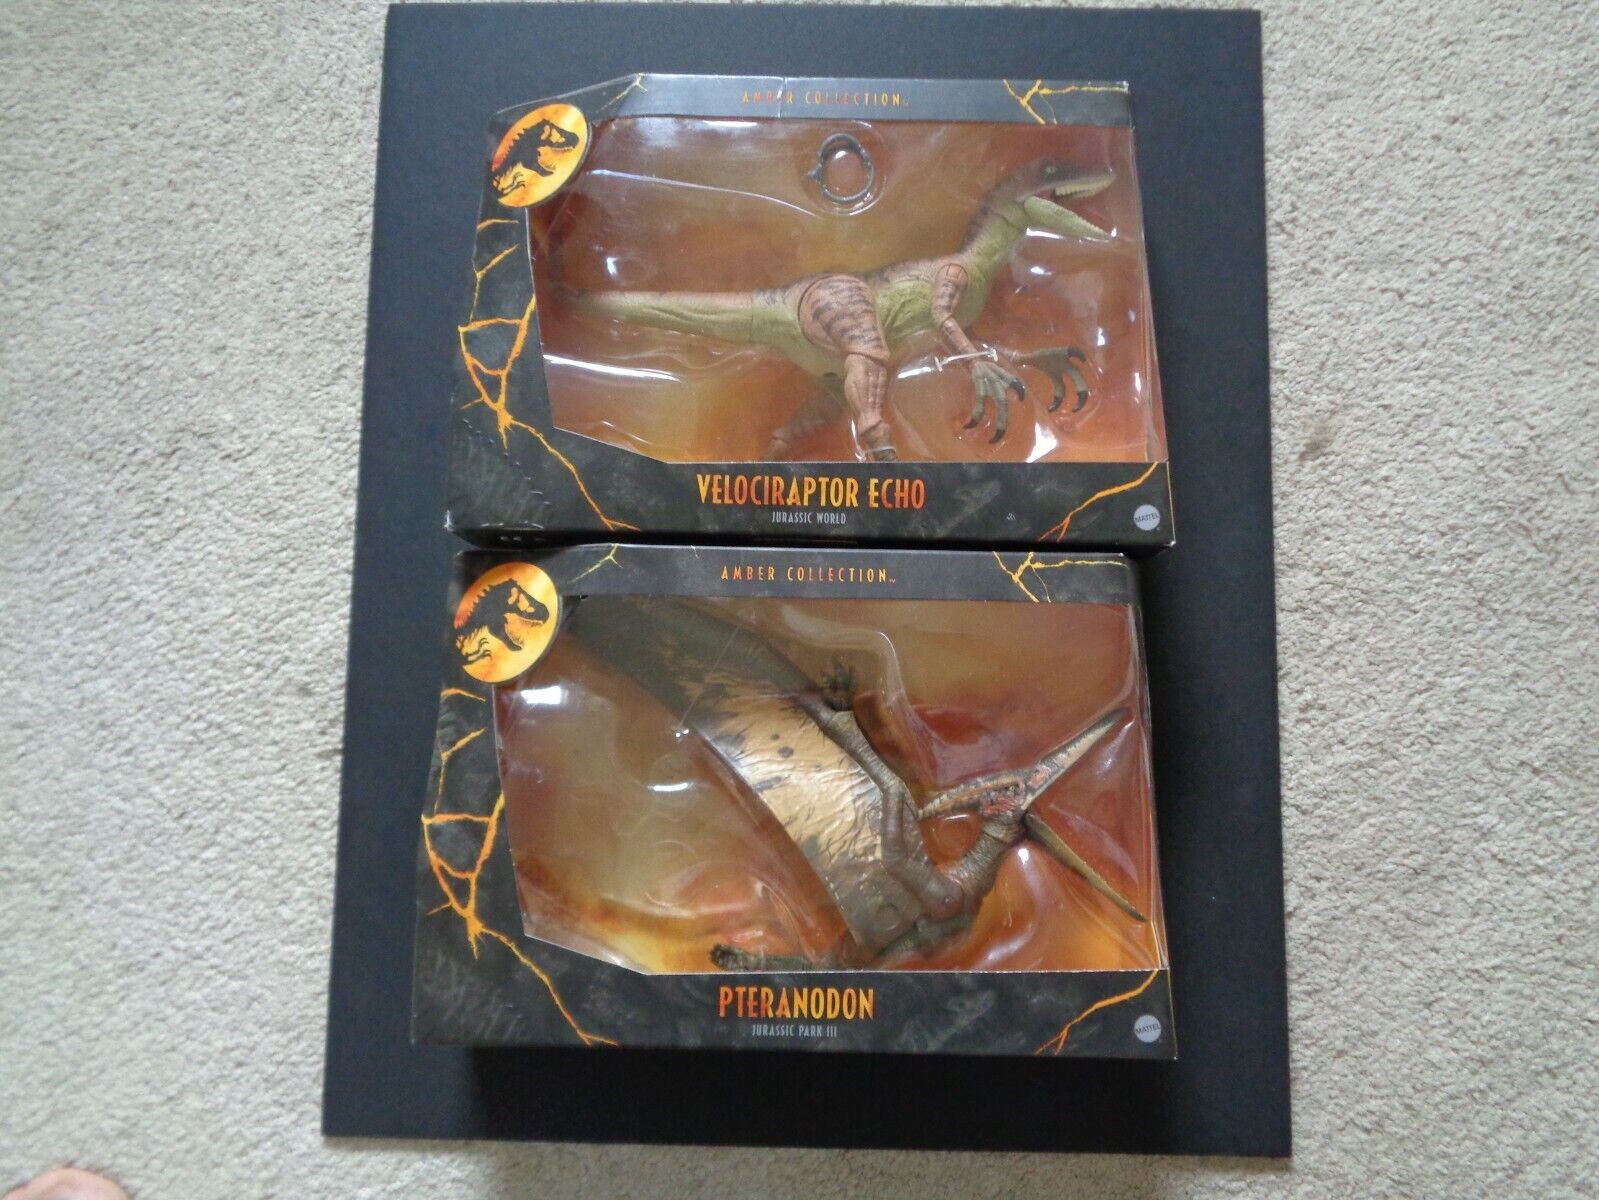 Amber Collection Velociraptor Echo and Pteranodon (Dinosaurs)